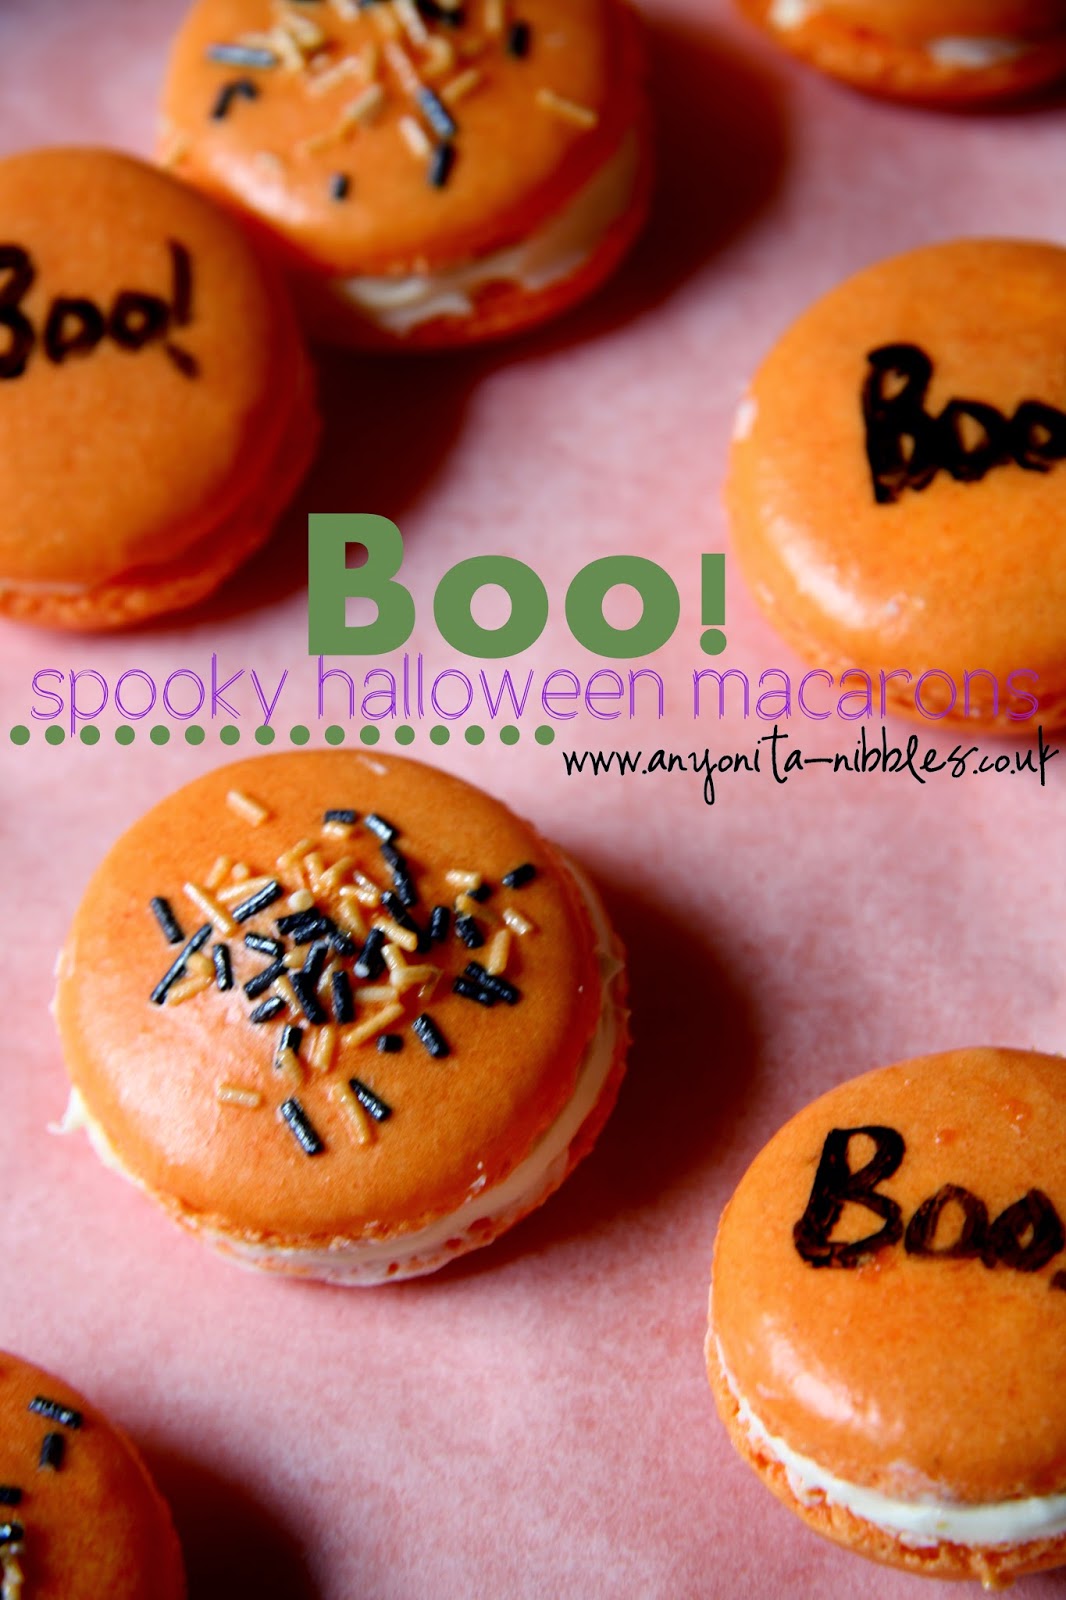 Boo! Spooky Halloween macarons from www.anyonita-nibbles.co.uk